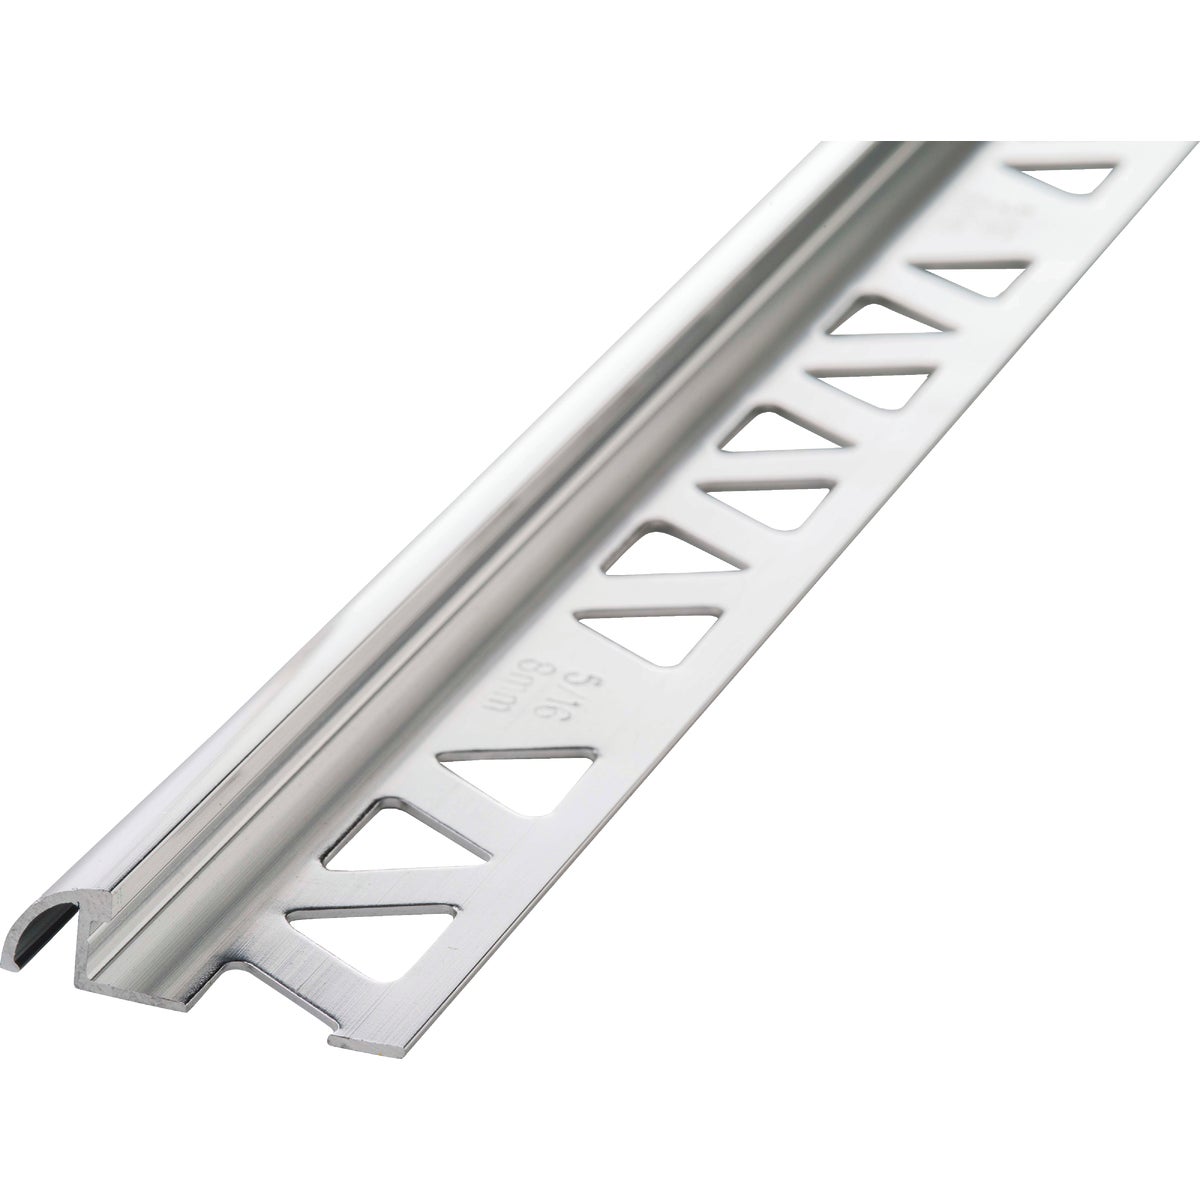 M-D Building Products 5/16 In. x 8 Ft. Bright Clear Aluminum Bullnose Tile Edging